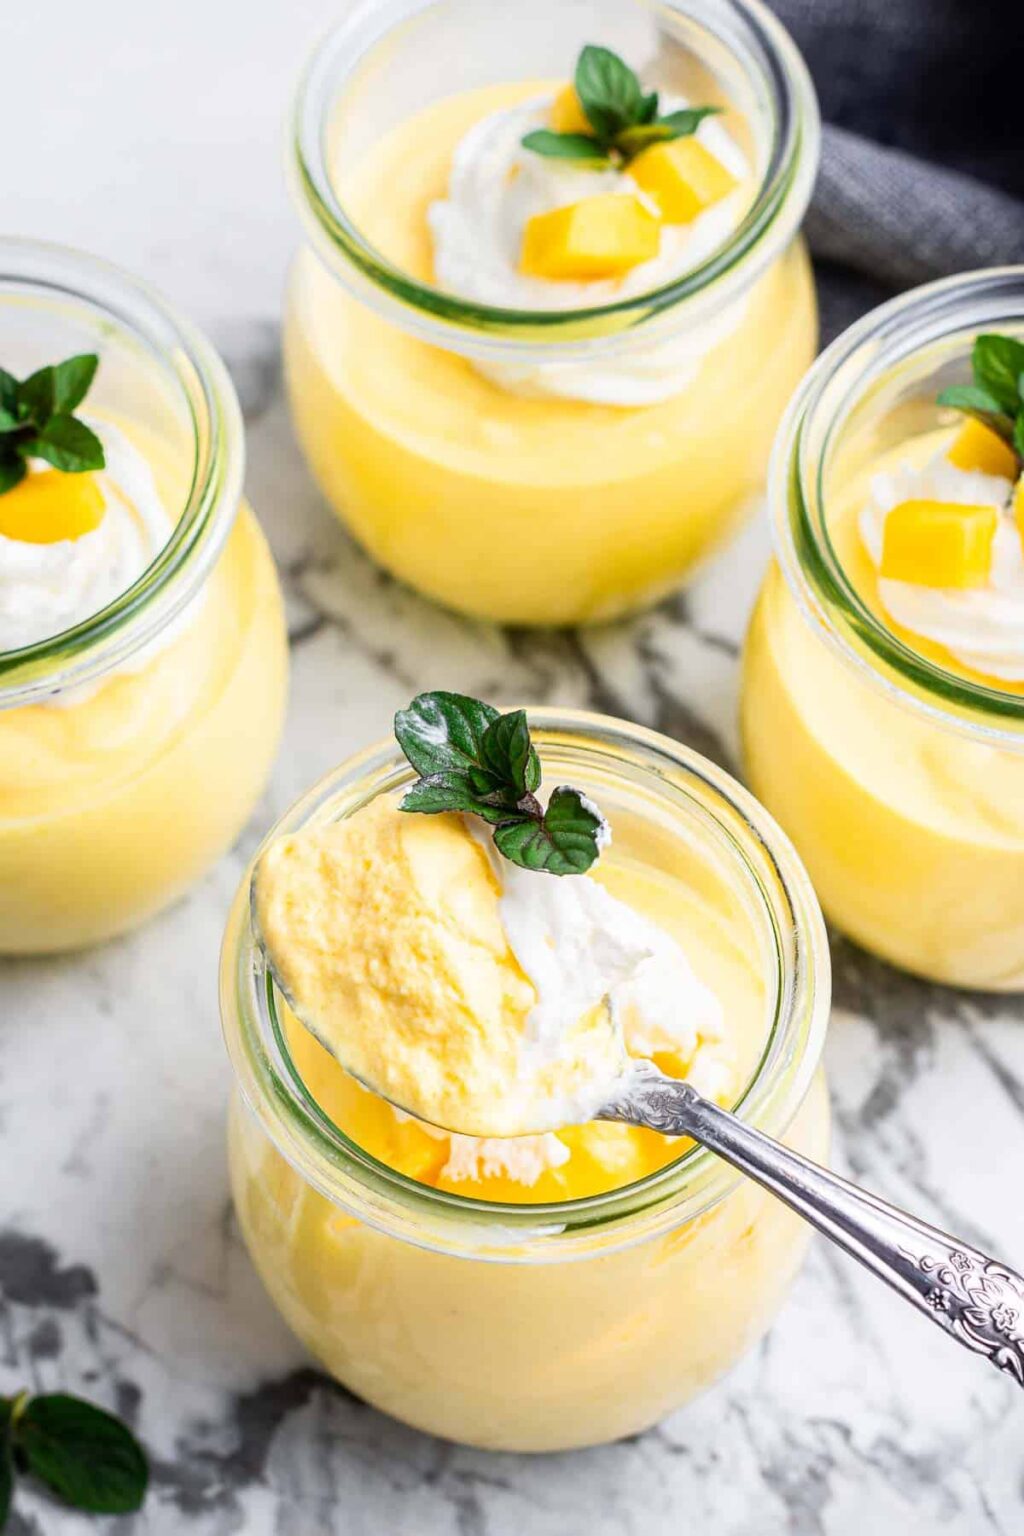 Creamy Mango Mousse Dessert Cups - Dessert for Two